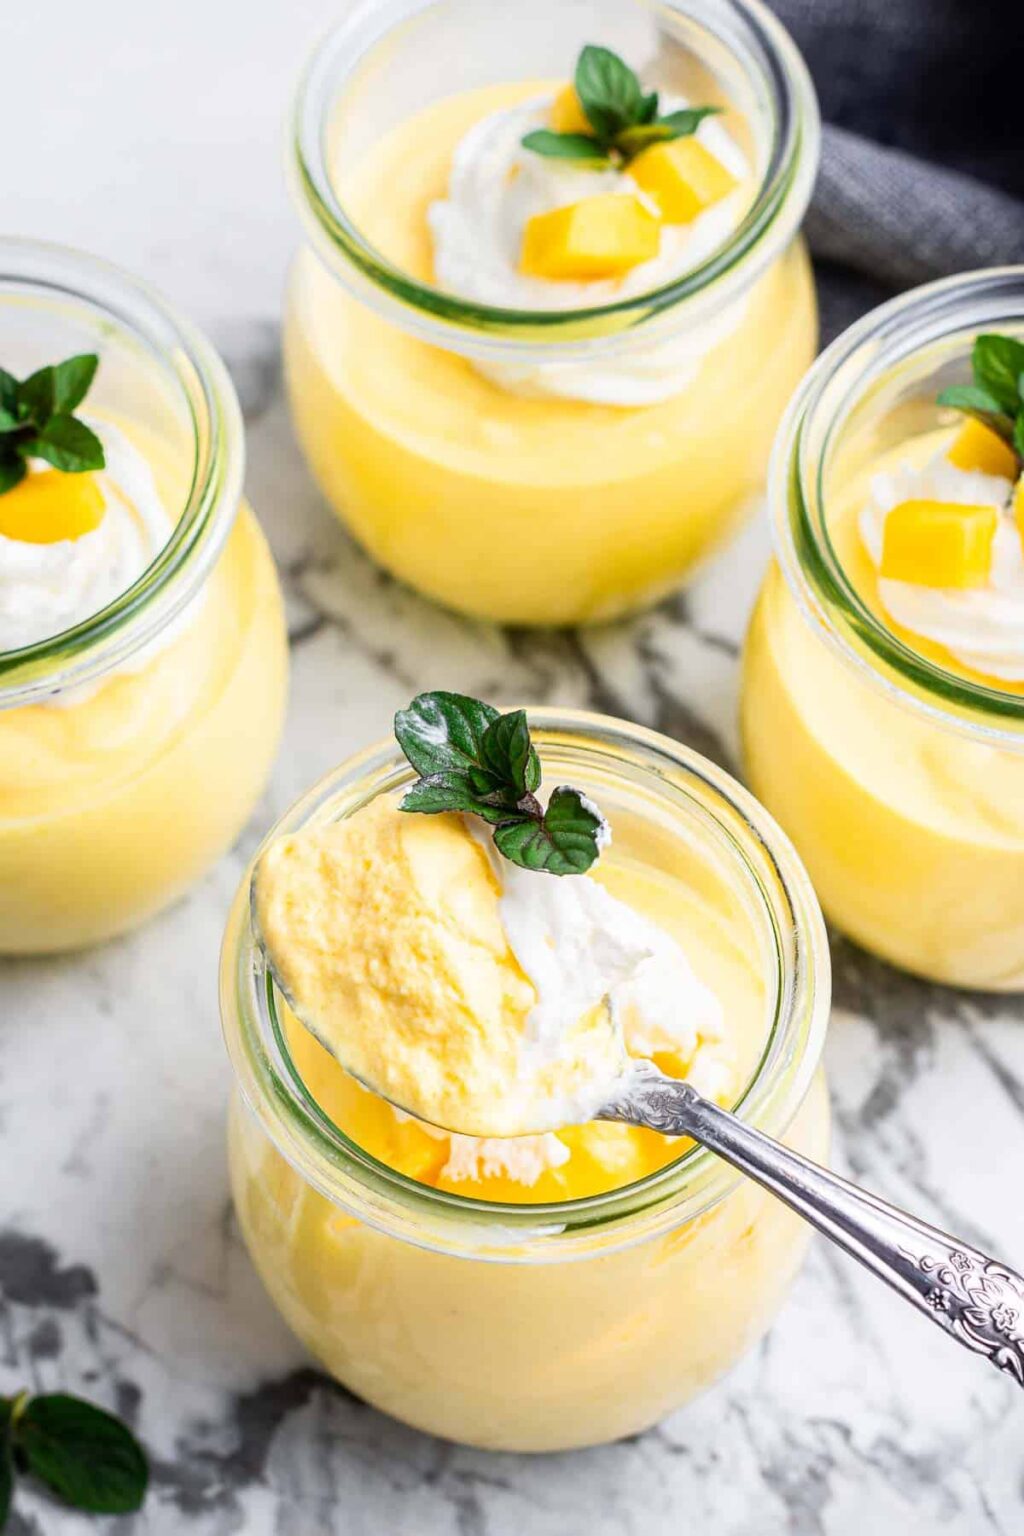 Creamy Mango Mousse Dessert Cups - Dessert for Two